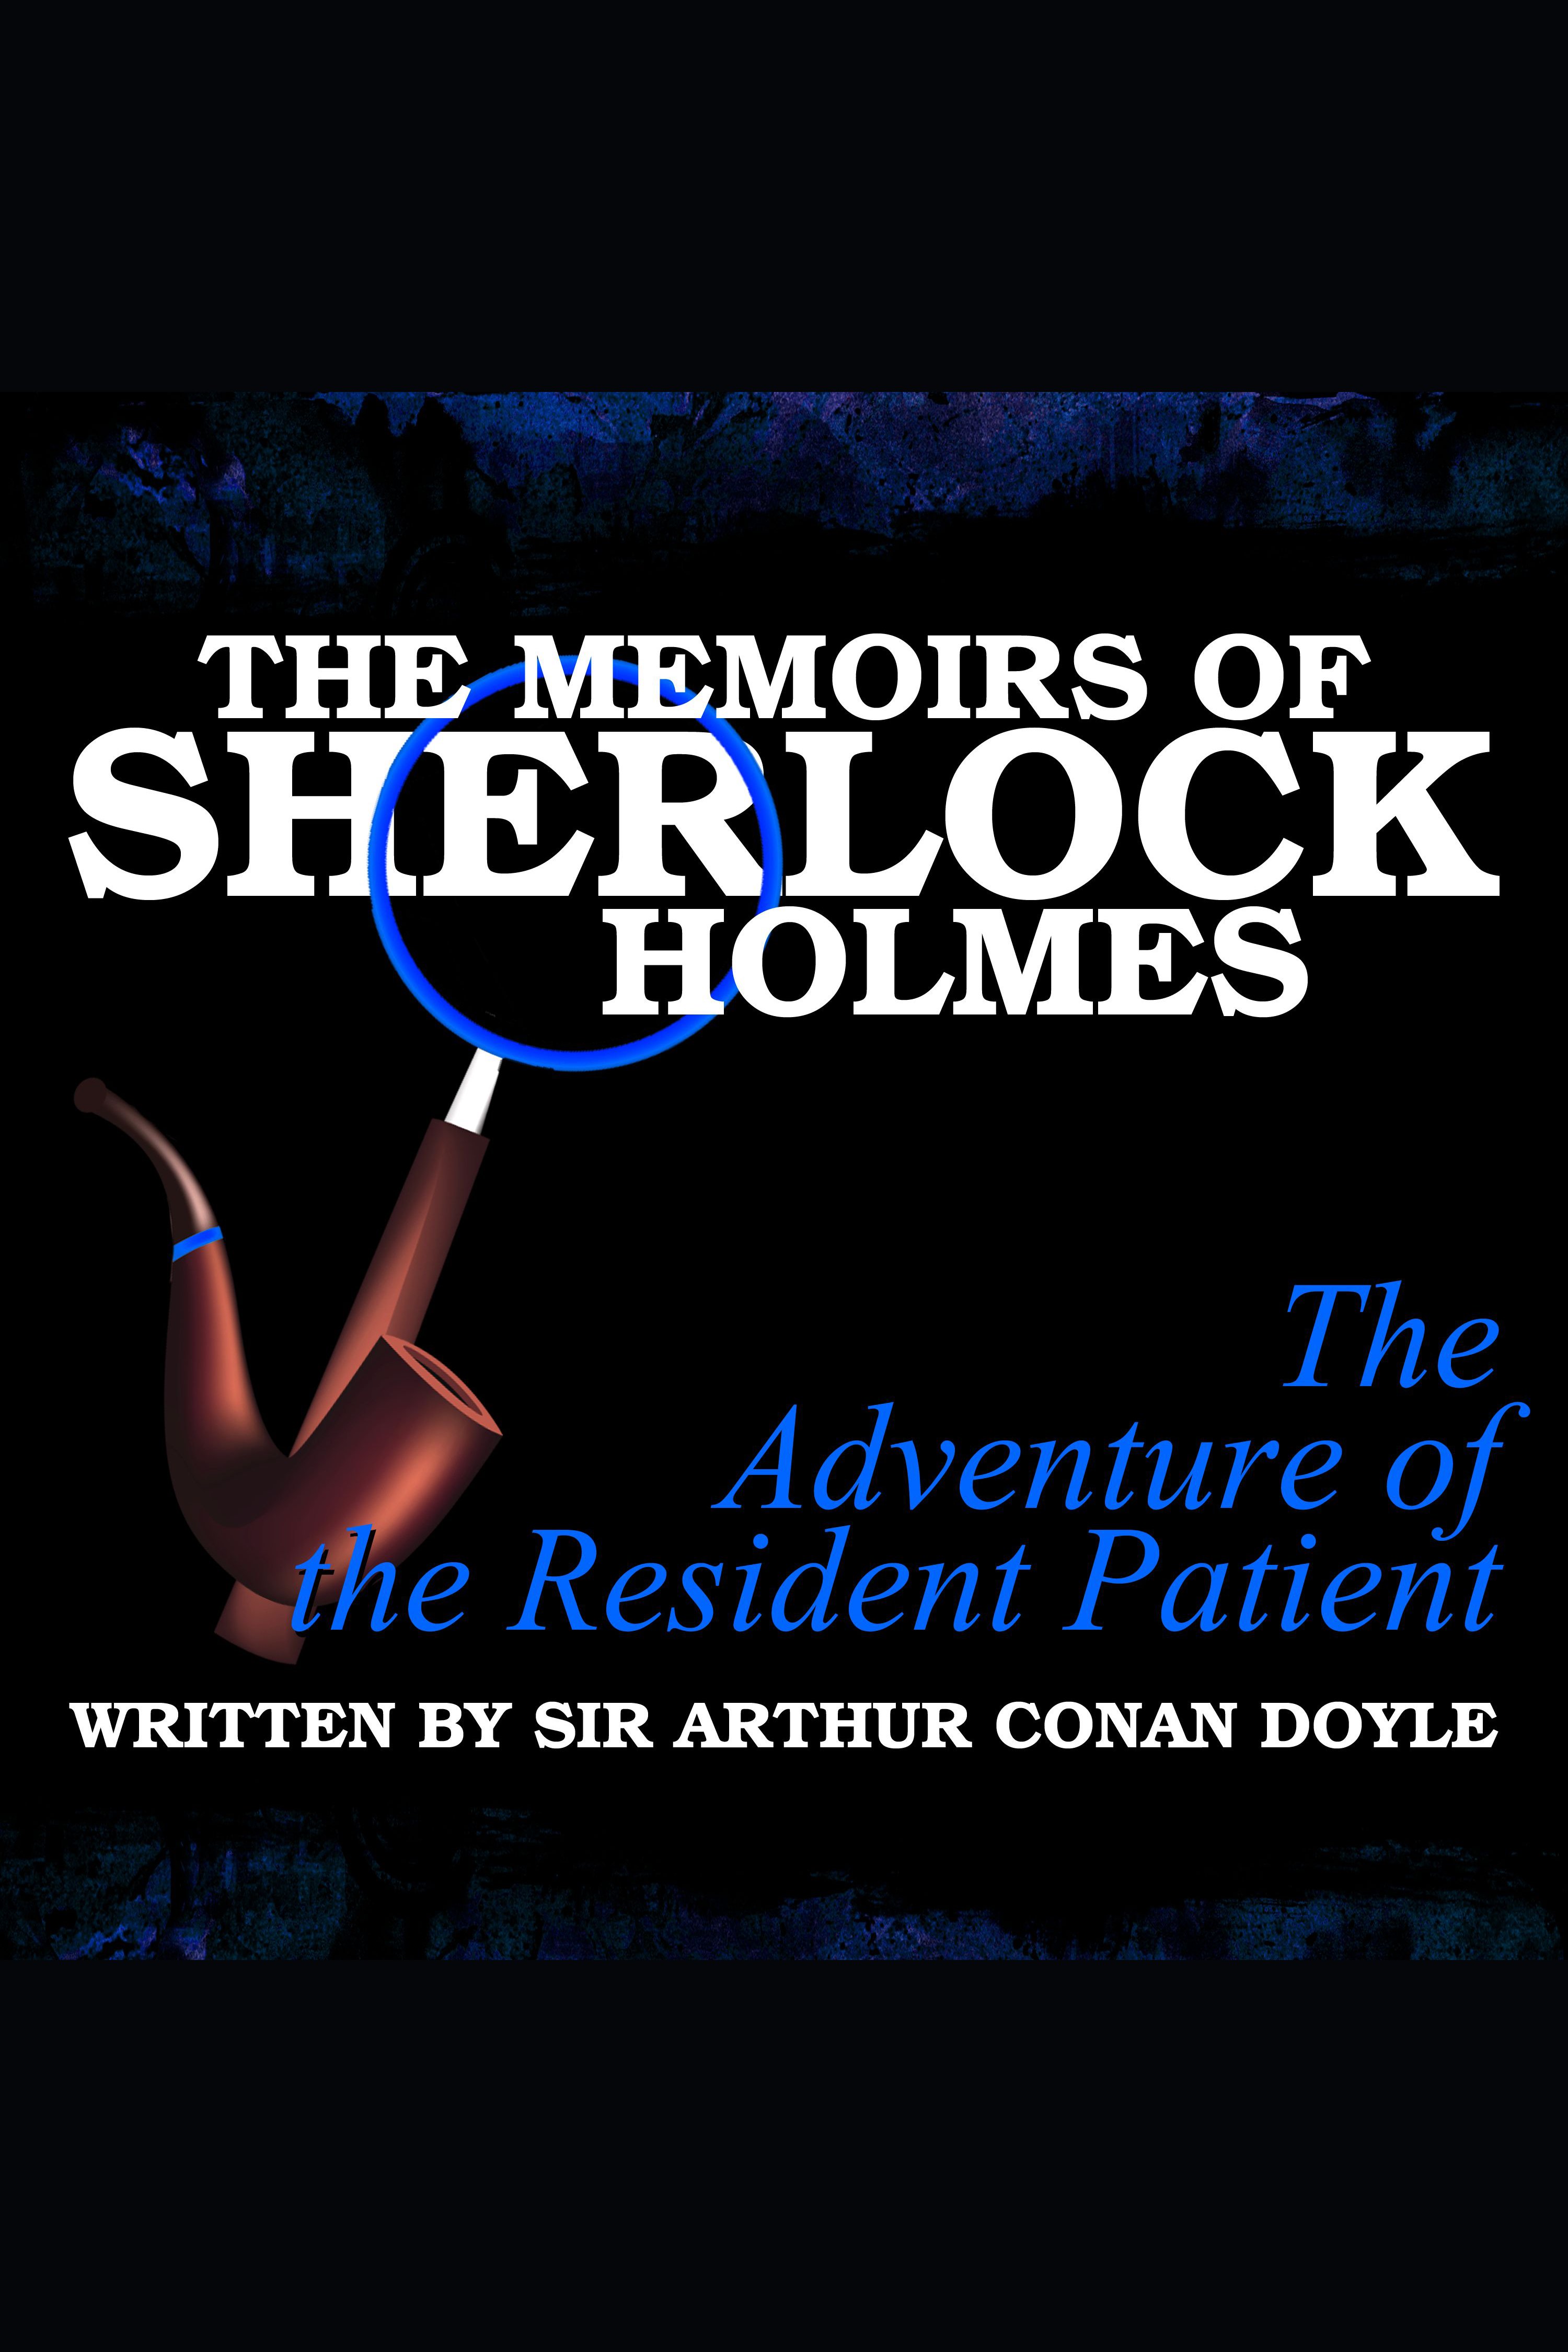 The Memoirs of Sherlock Holmes - The Adventure of the Resident Patient cover image